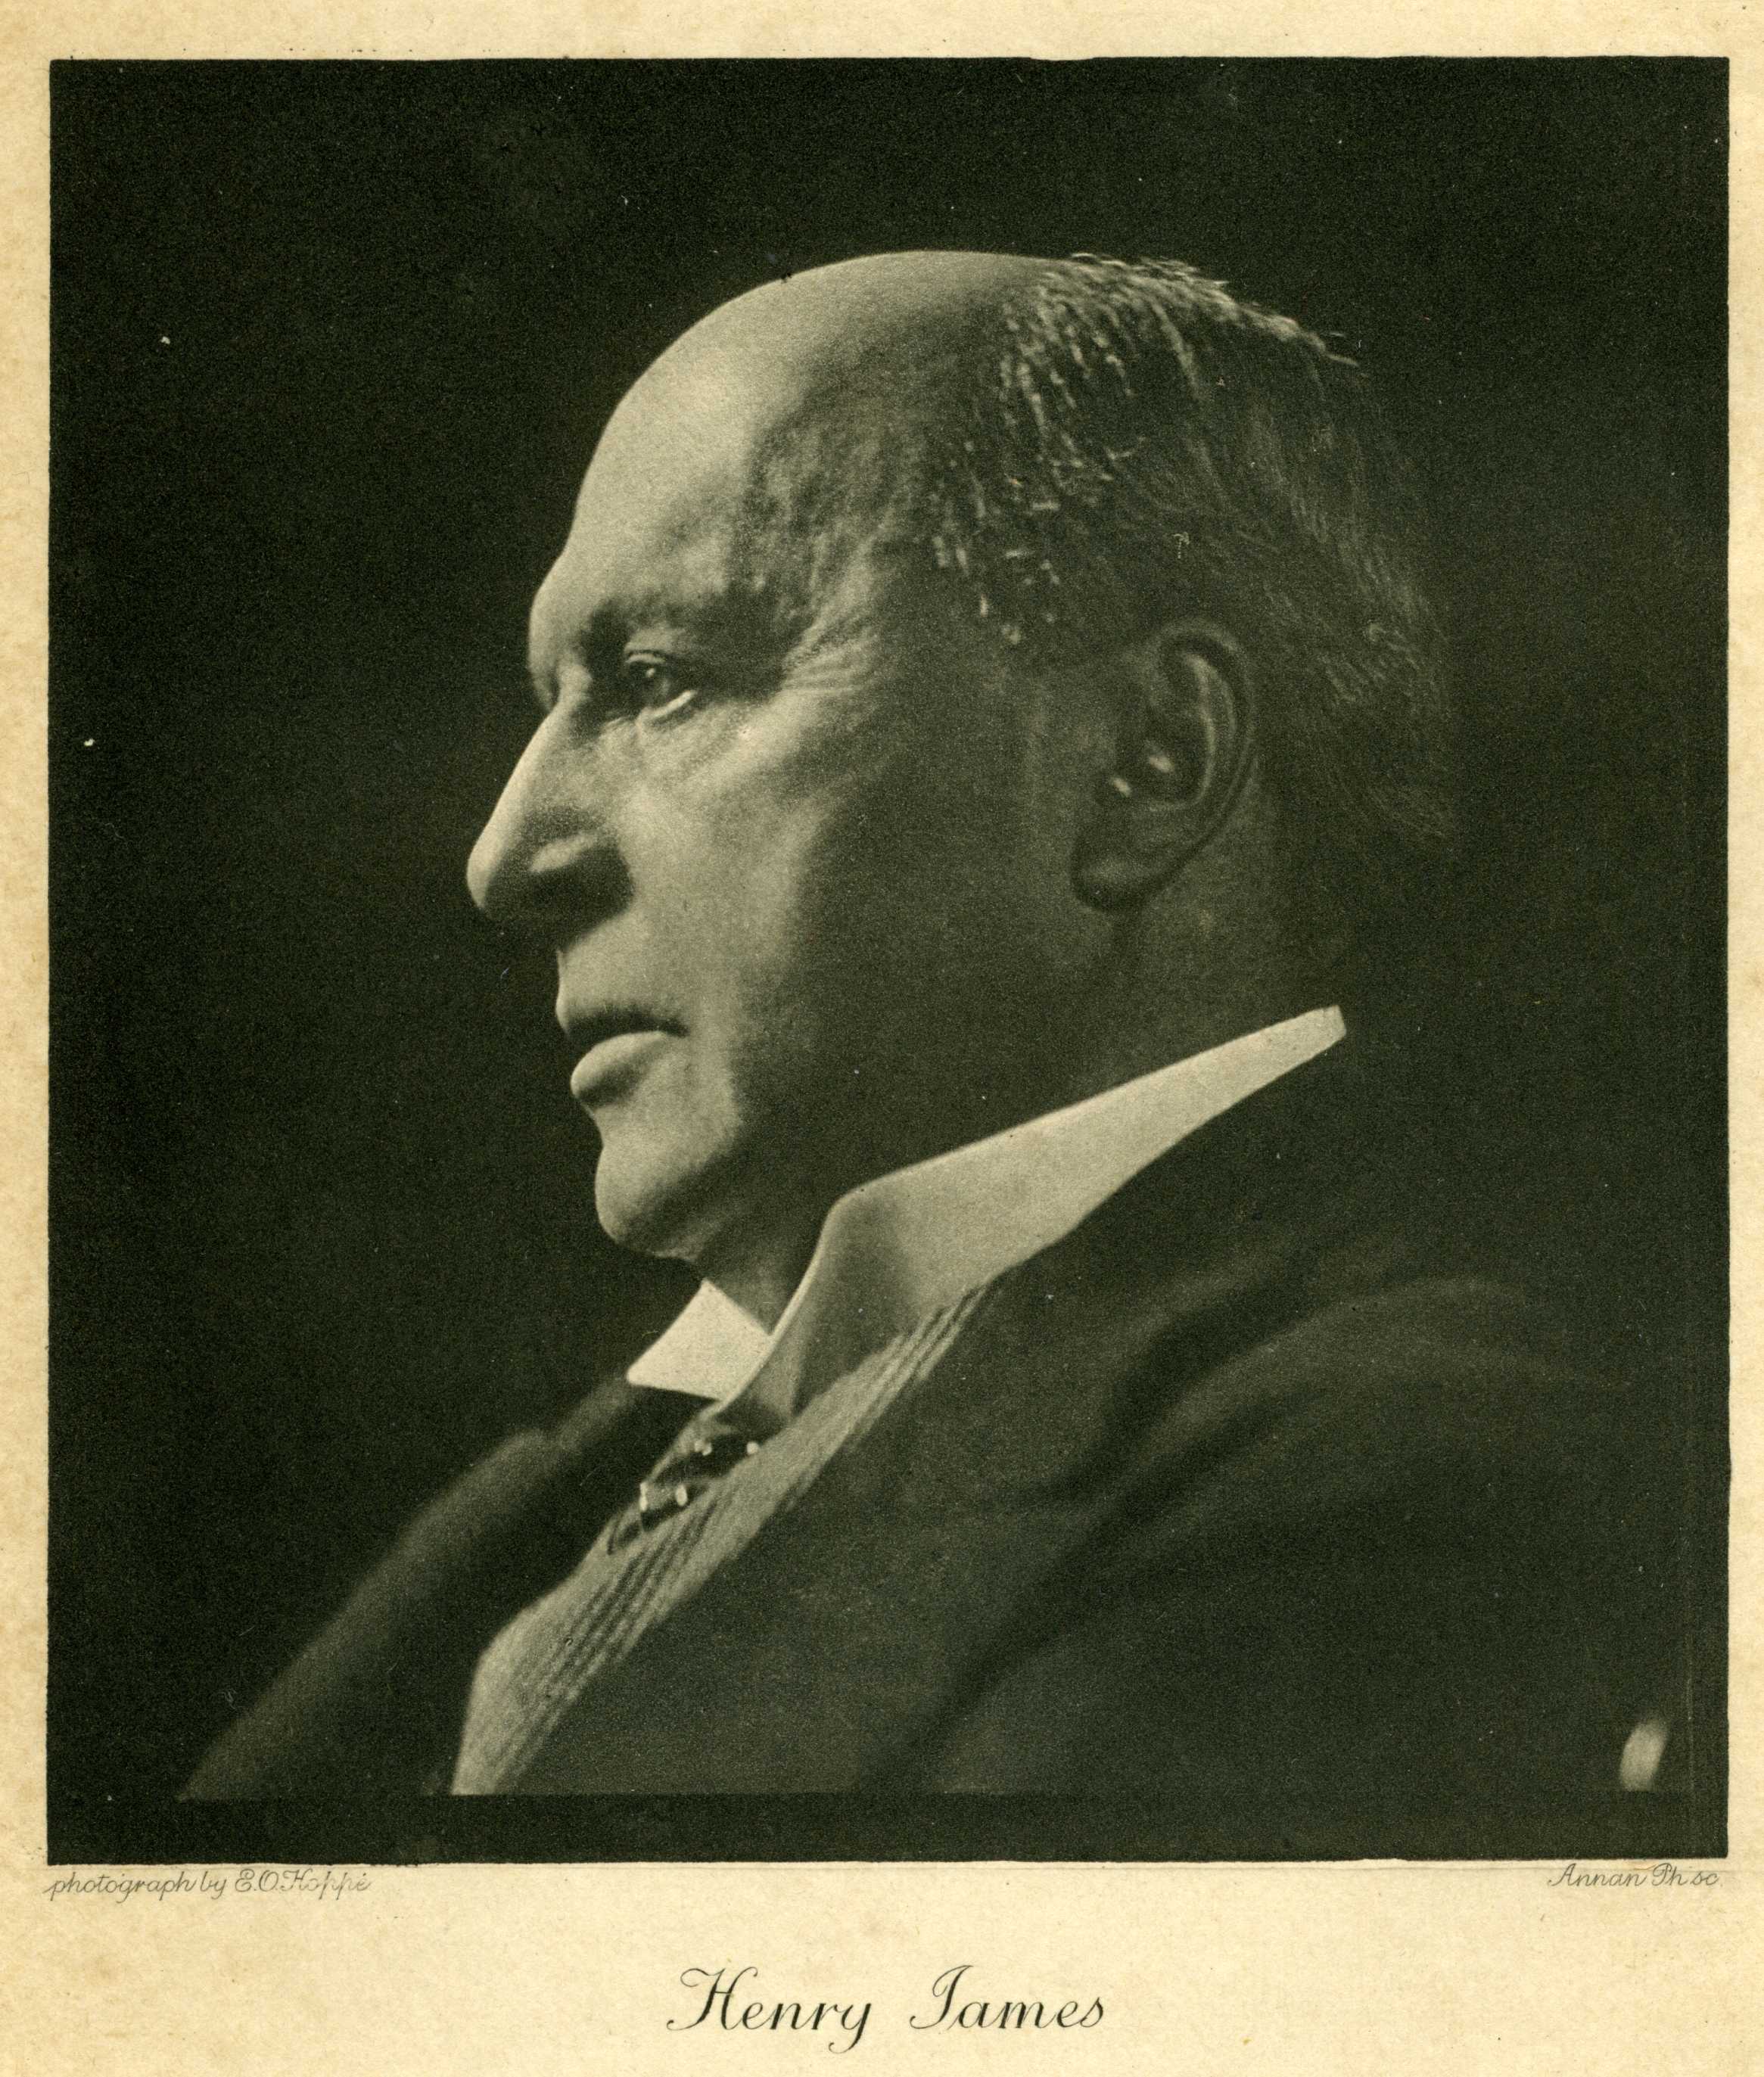 Author Henry James